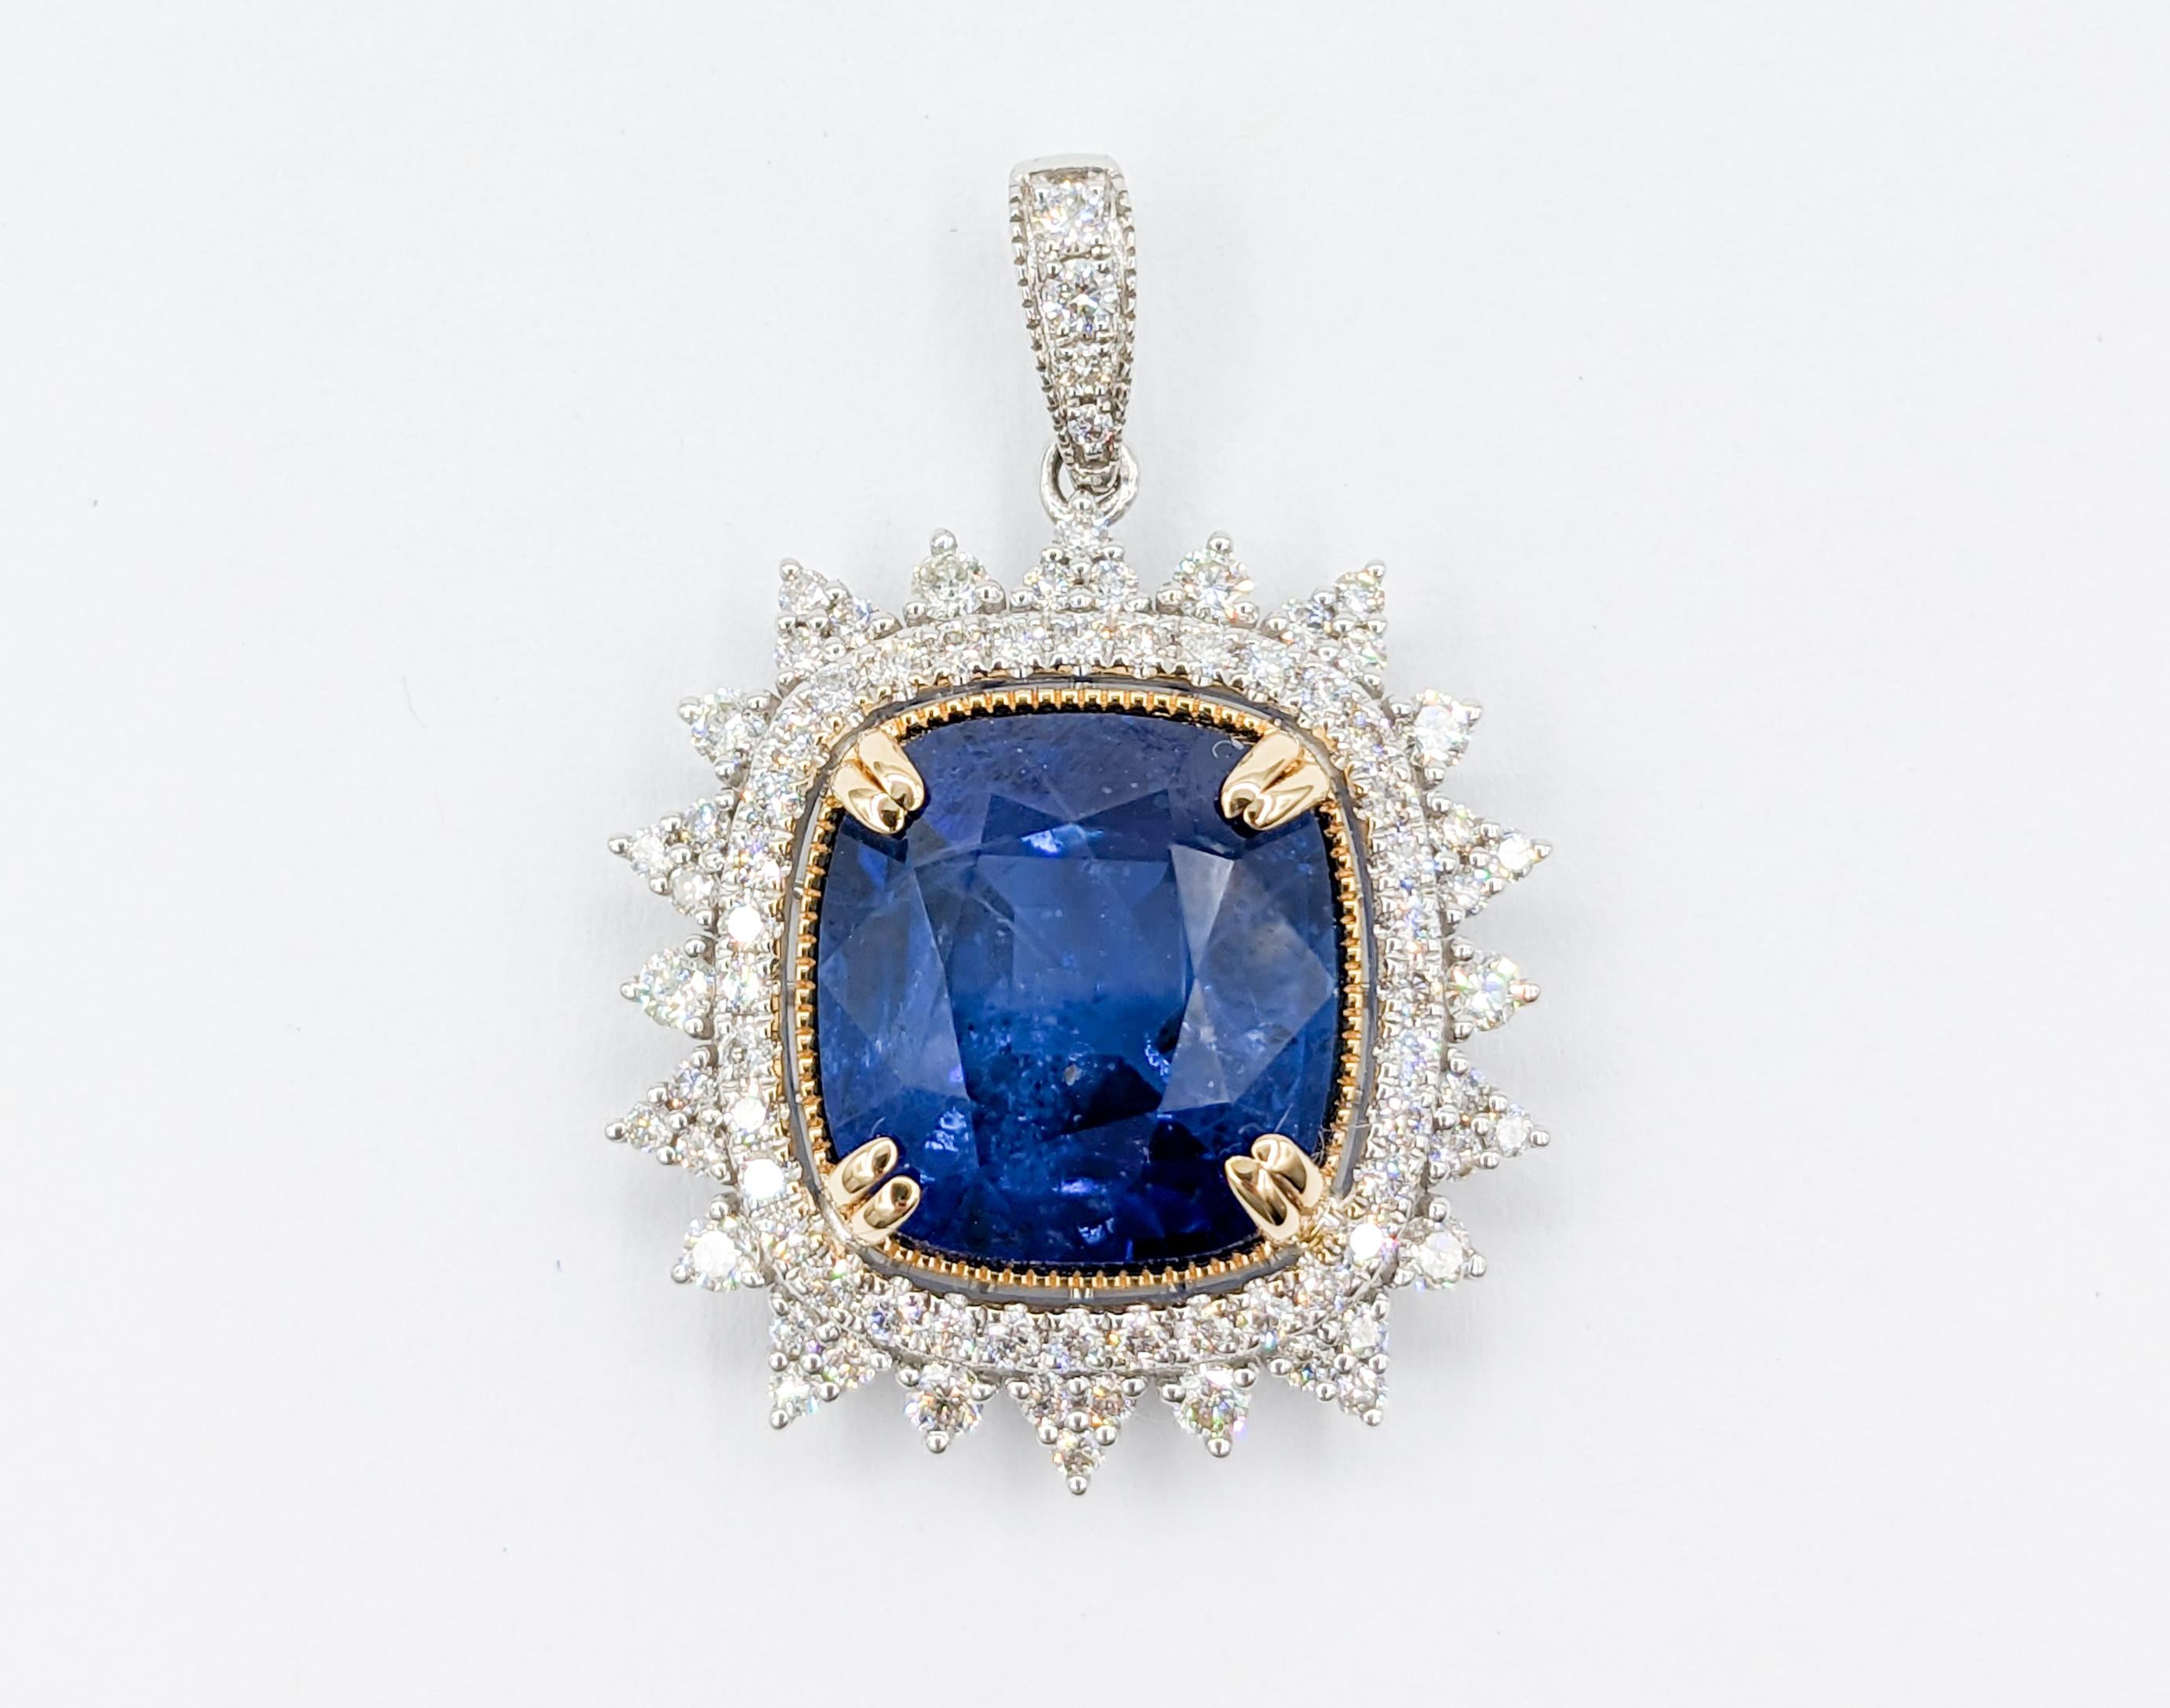 Stunning 14.2ct Sapphire Pendant with Diamond Halo in 14kt White Gold For Sale 2